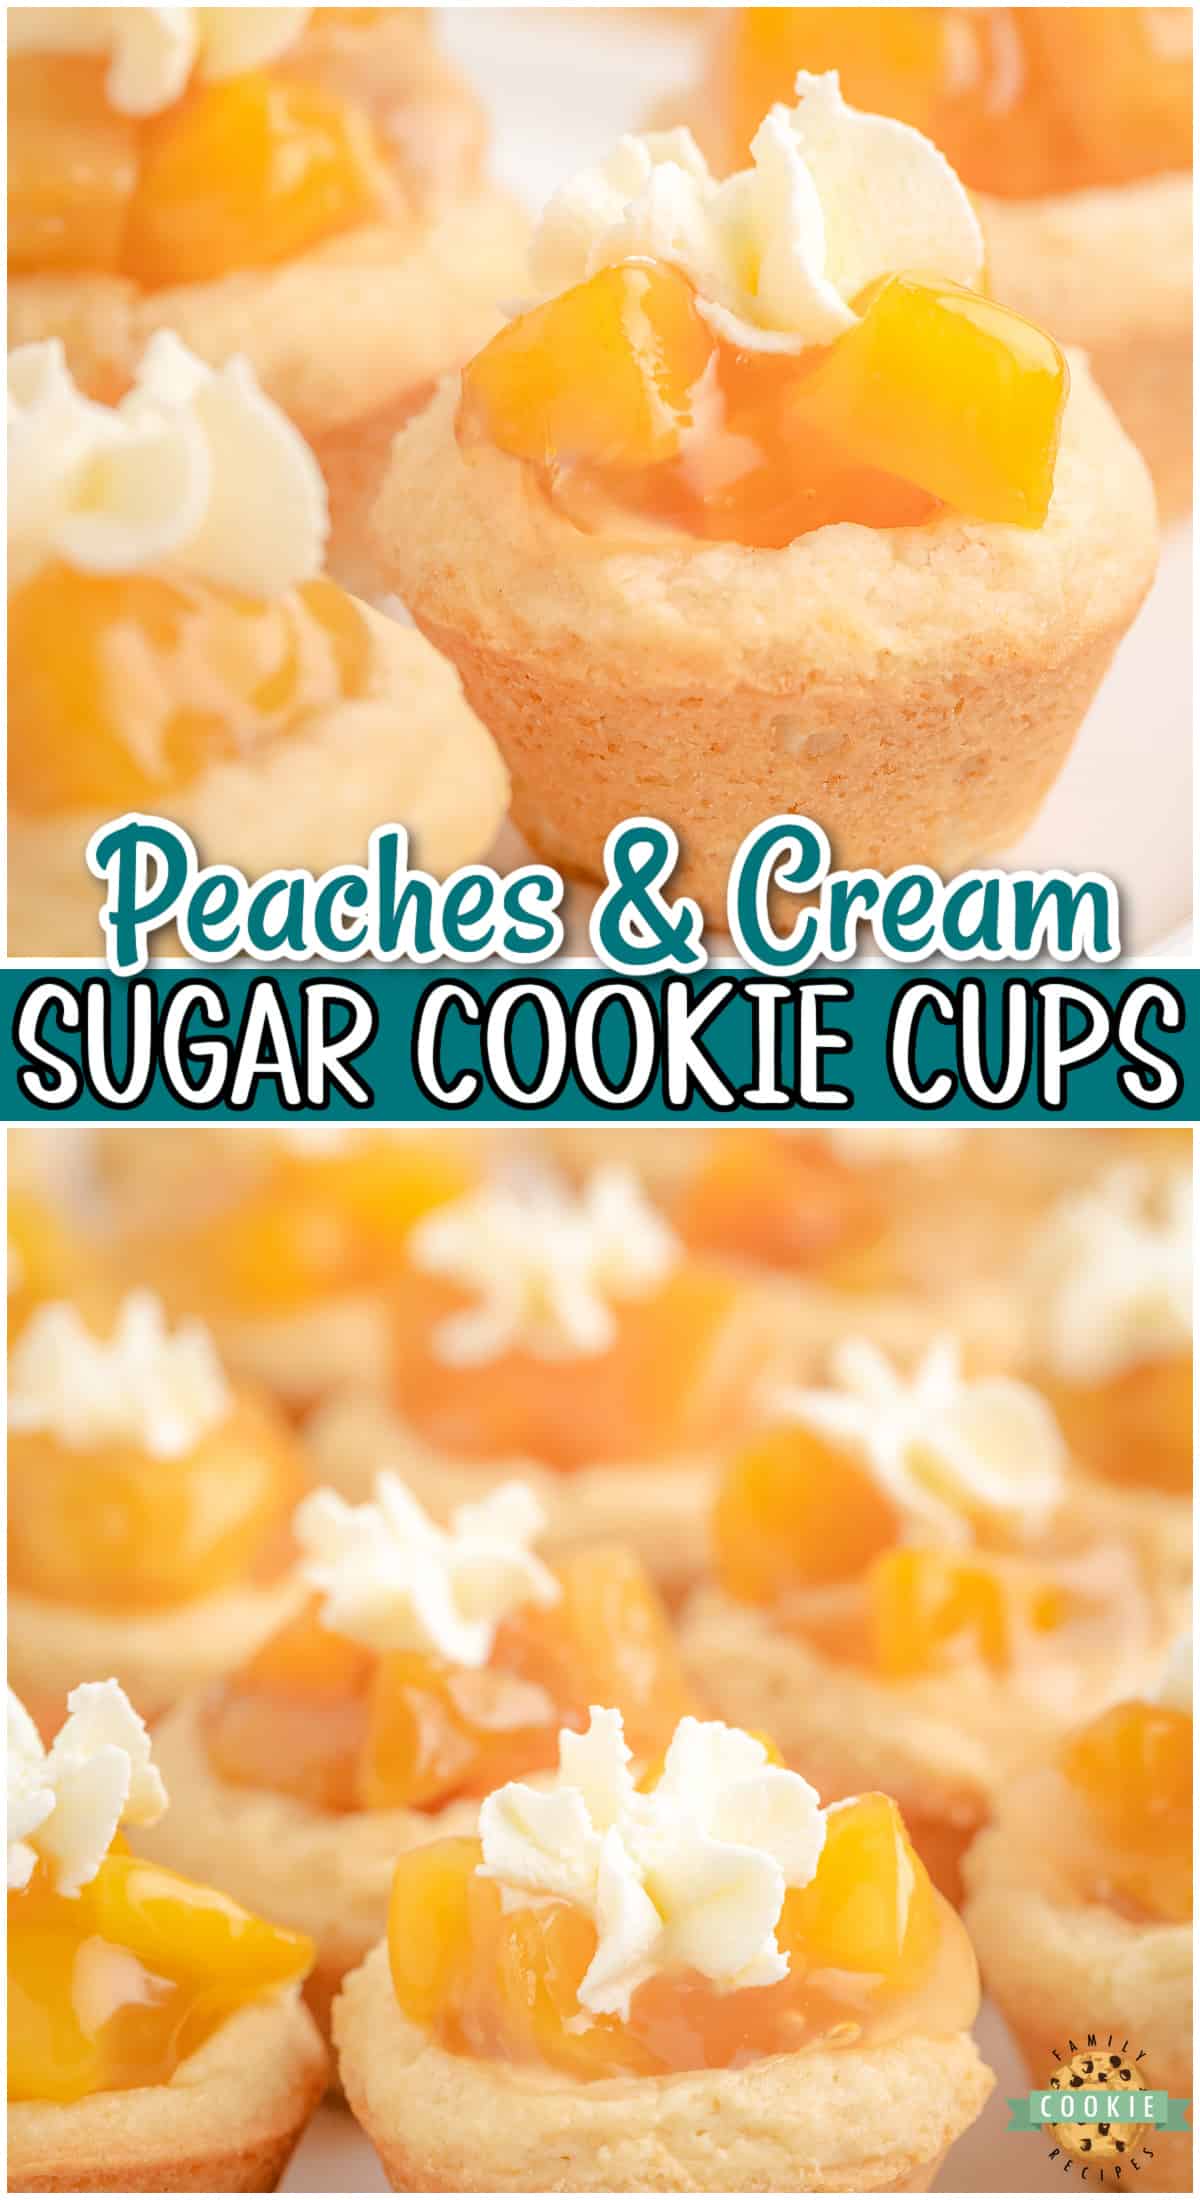 Lovely Peaches and Cream Cookies made with buttery cookie dough, baked & topped with peach pie filling and cream. These darling peach cookies with their bright, fruity flavor, are a crowd pleaser!